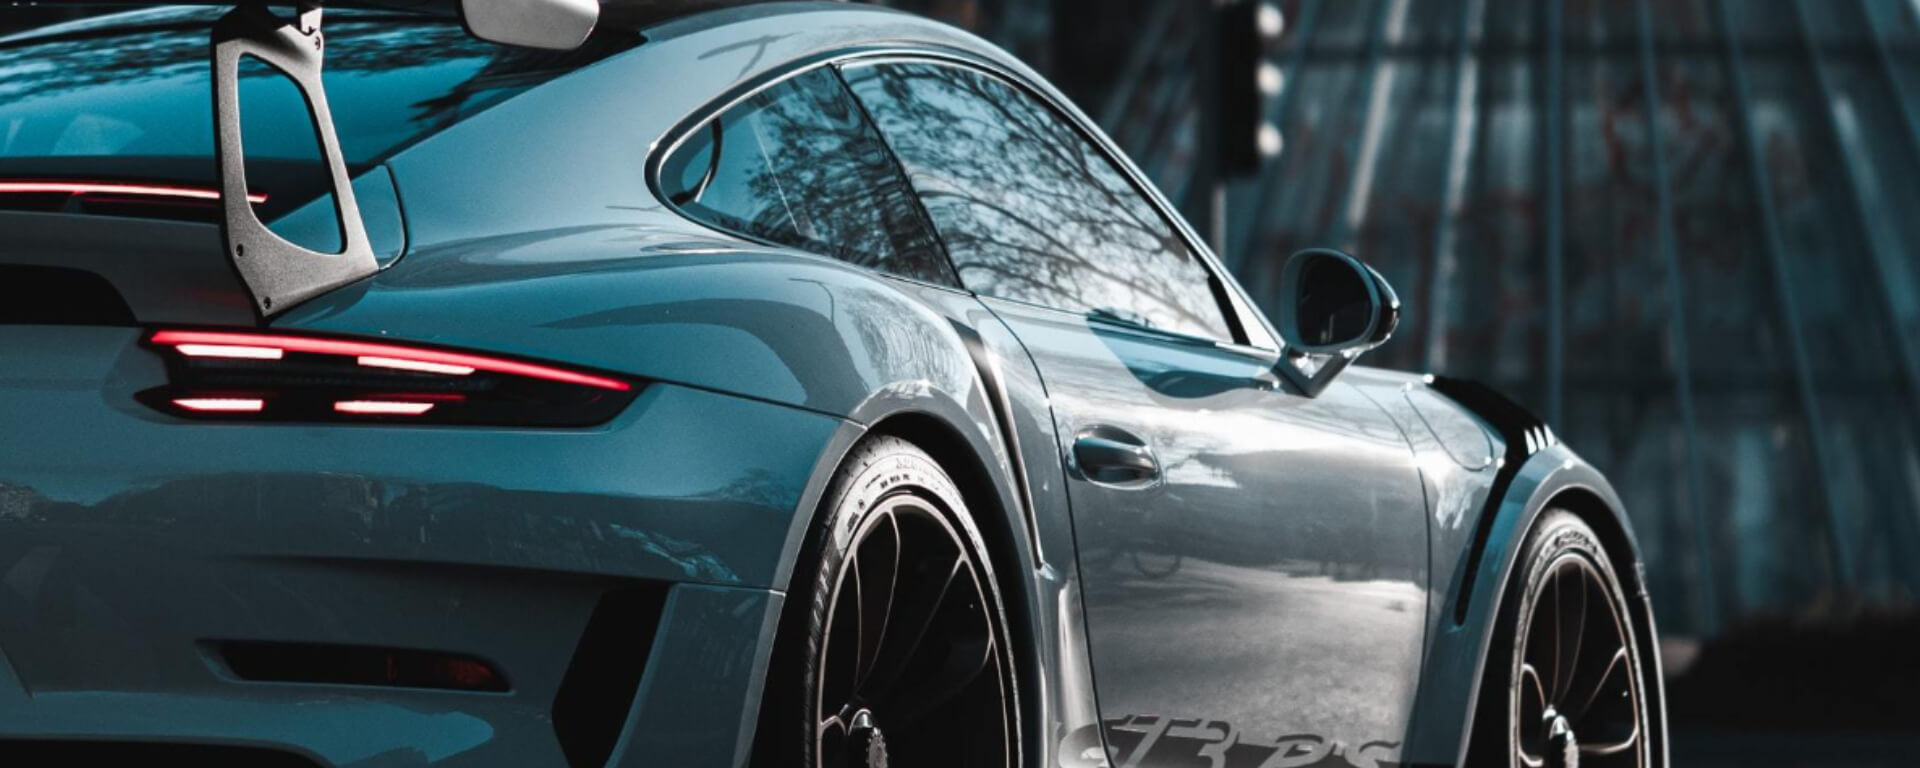 Why Are German Cars So Good? Header Image